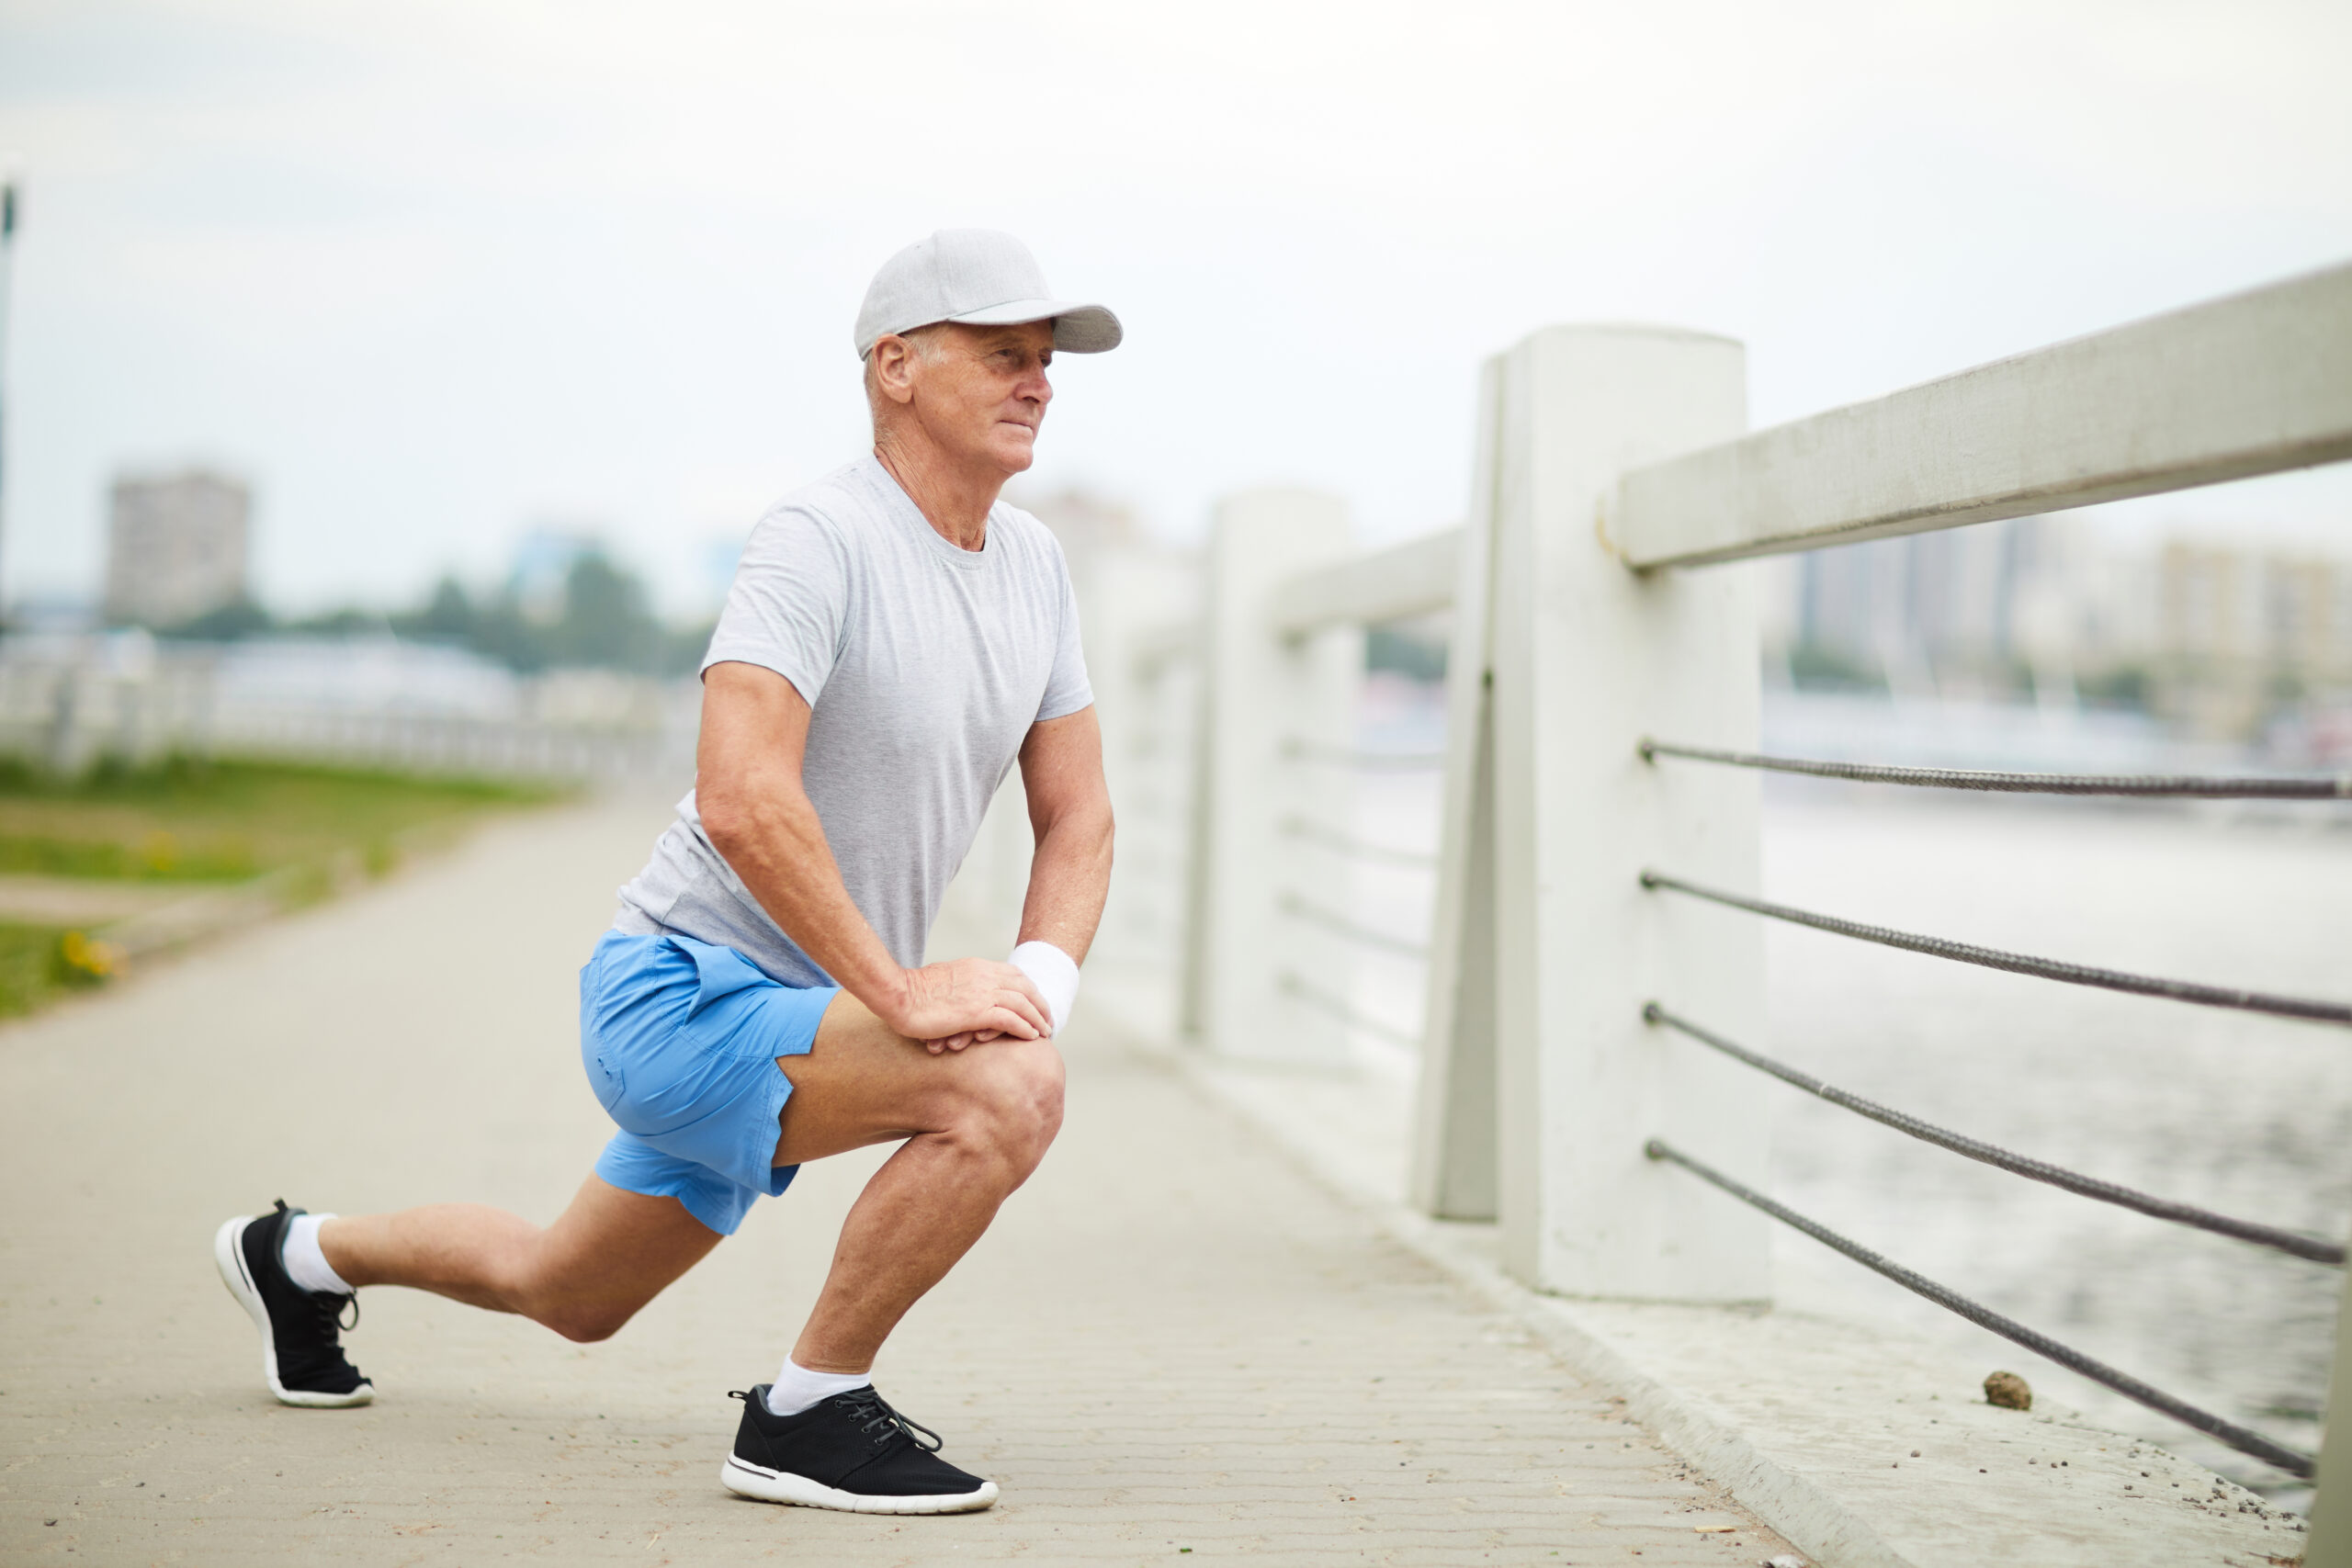 TOP TIPS FOR GETTING IN SHAPE AFTER 50